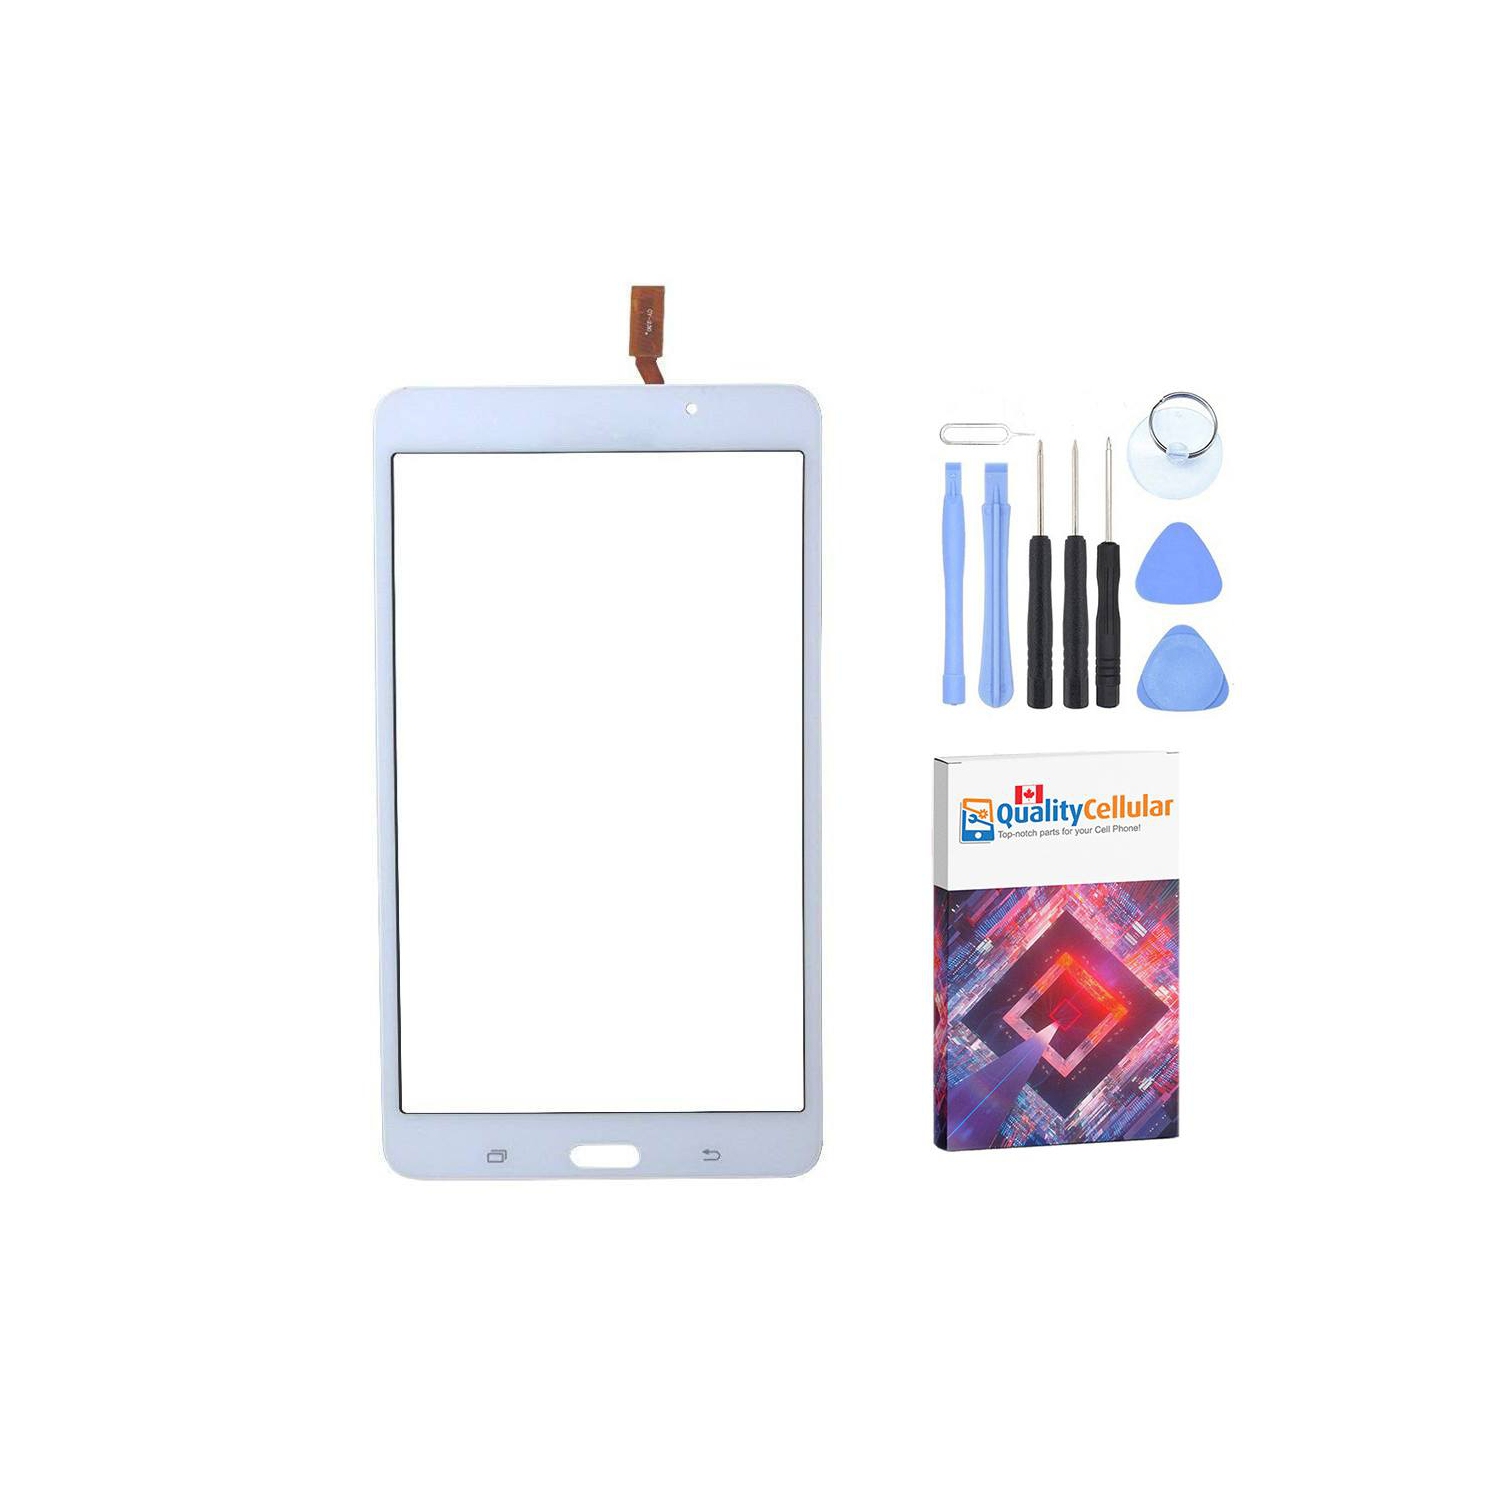 Touch Screen Digitizer for Samsung Galaxy Tab 4 7.0 SM-T230NU - White